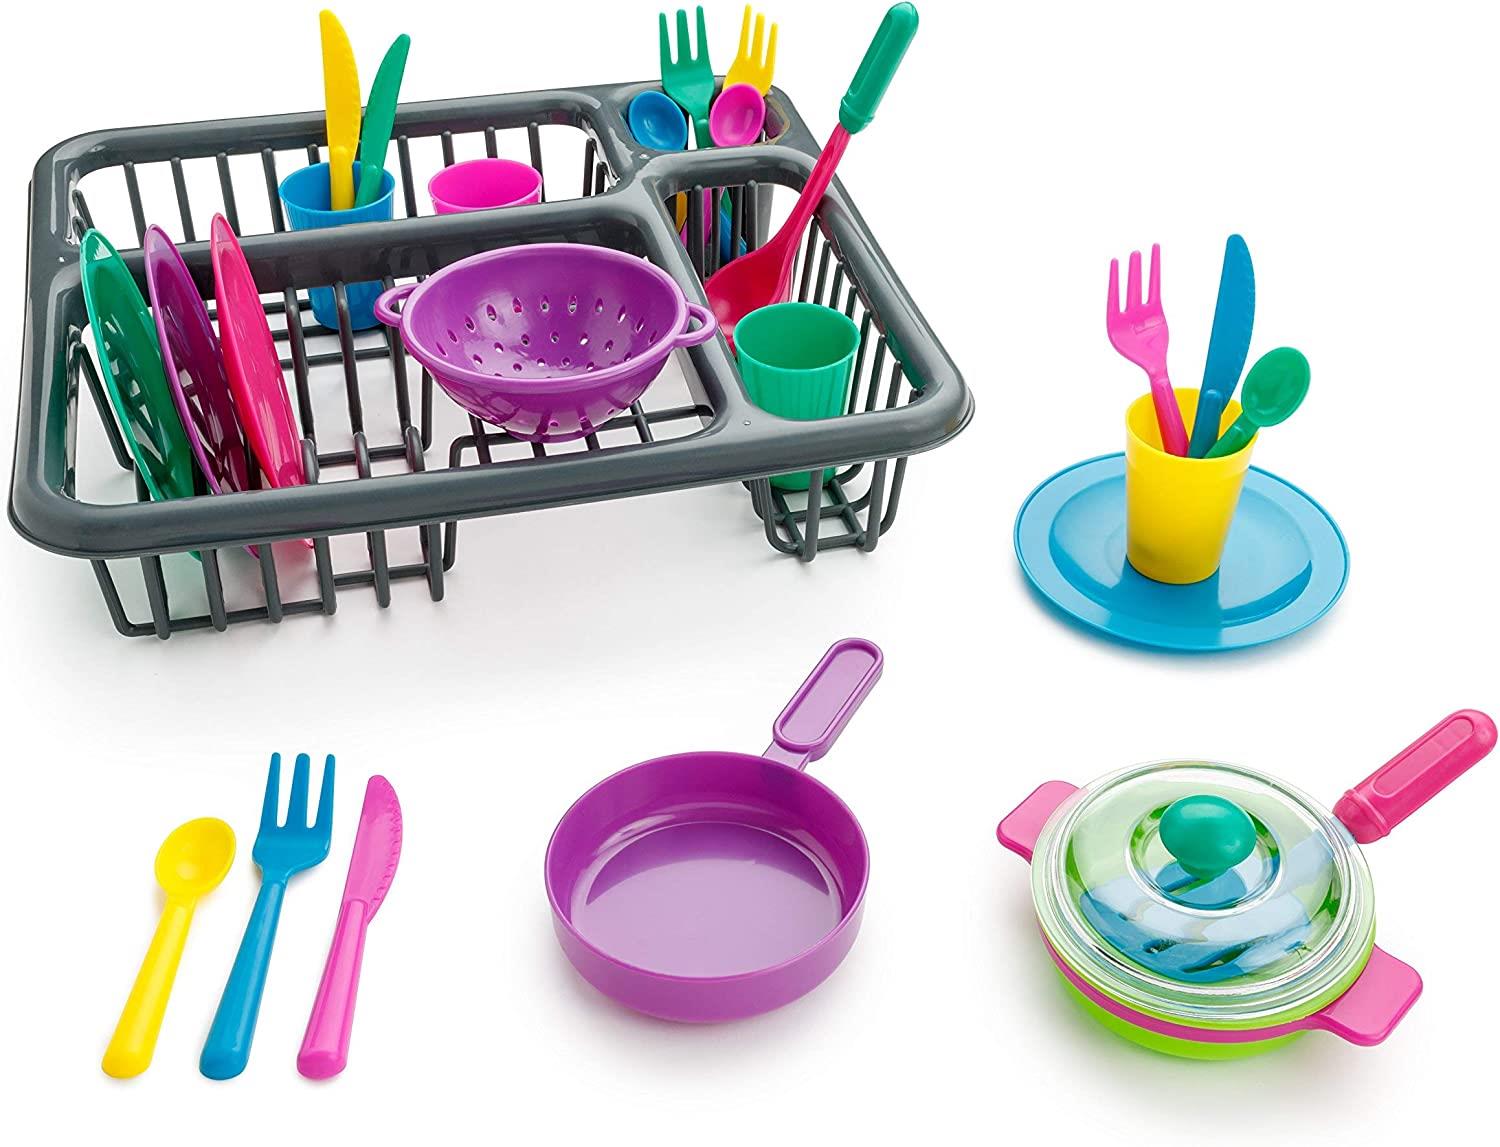 Kids Role Play Toy Set Kitchen Accessories Dish Washing Drainer 27 Pieces The Magic Toy Shop - The Magic Toy Shop